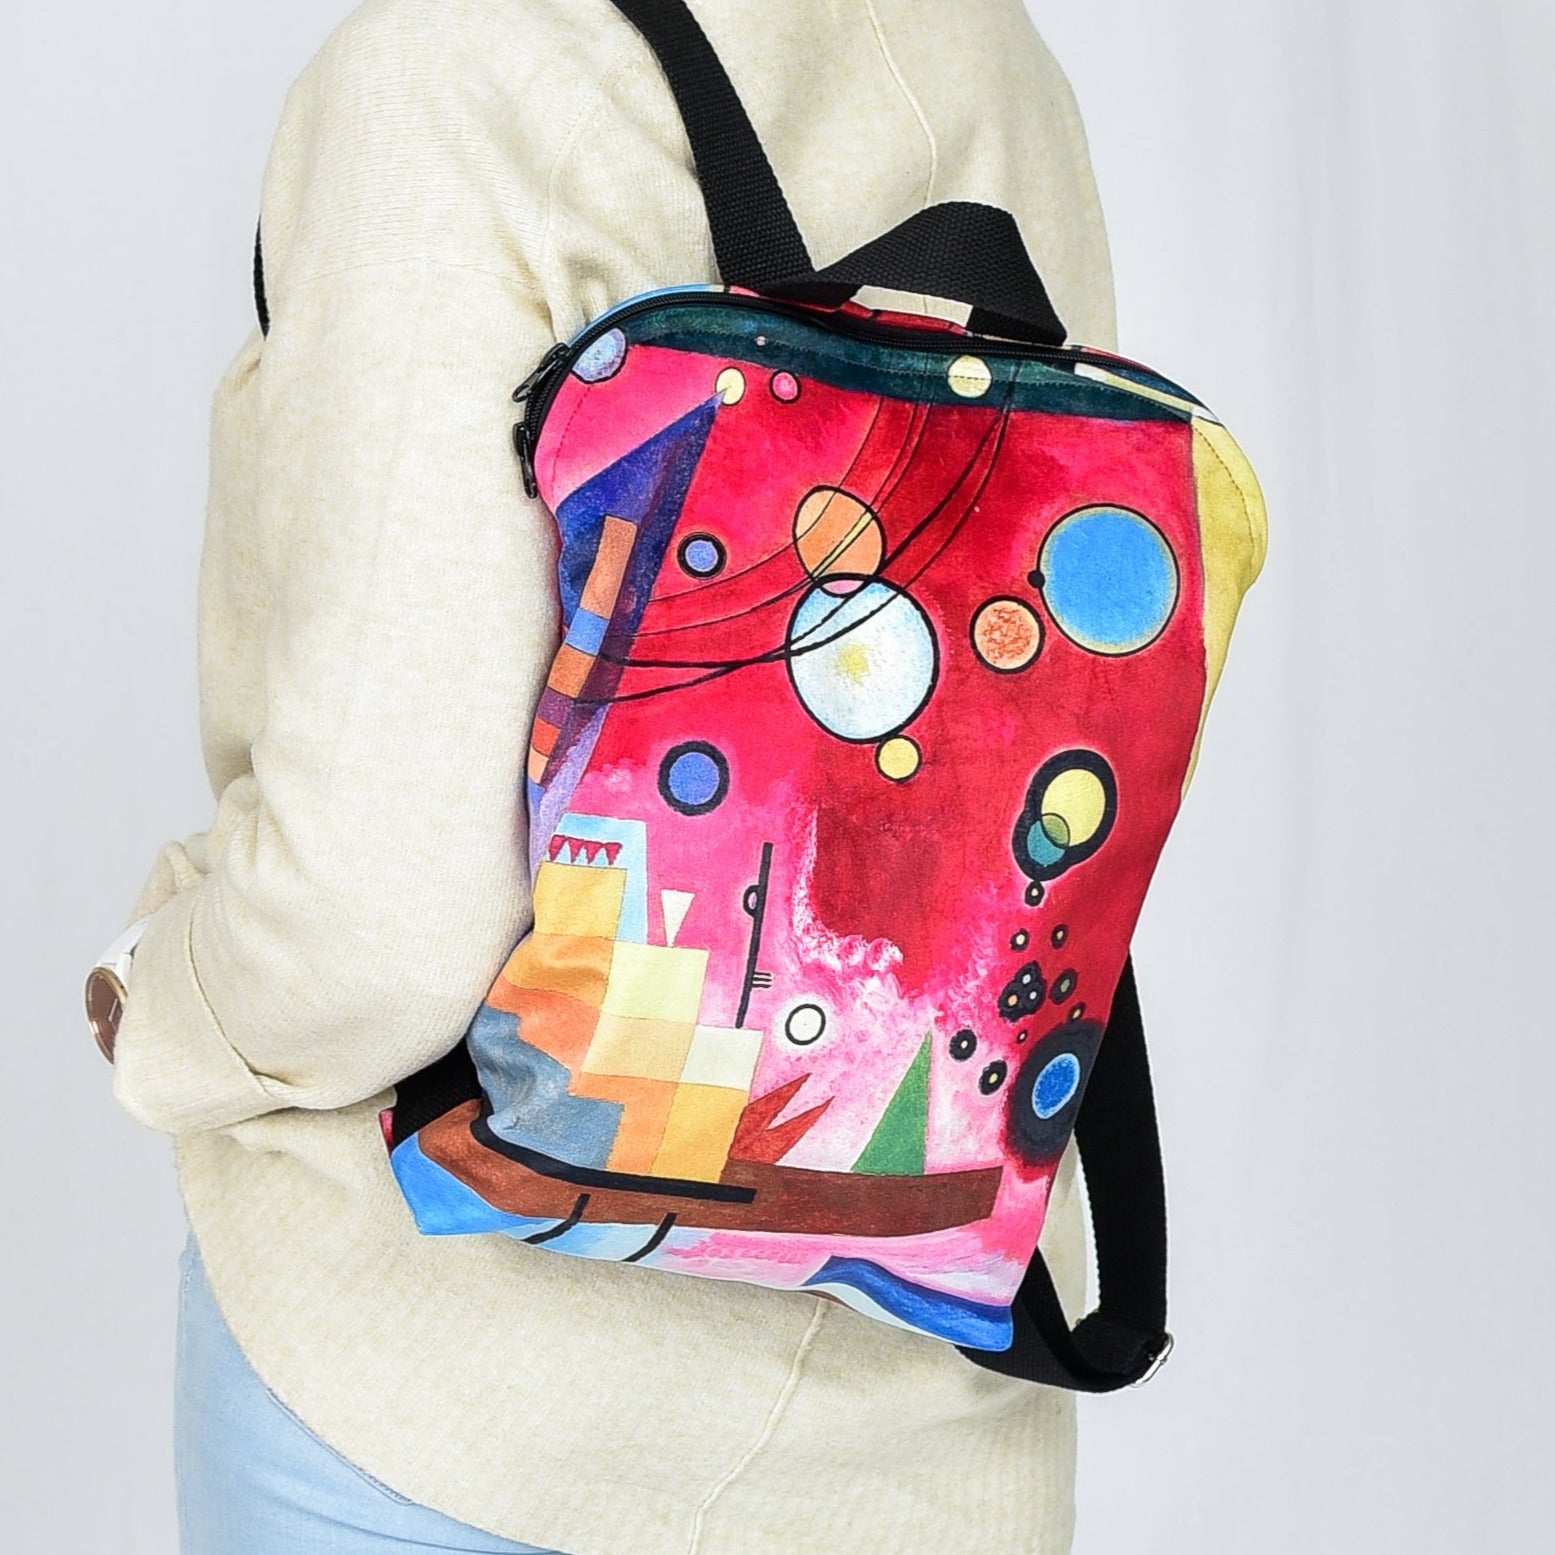 Backpack Wassily Kandinsky "Heavy Red"